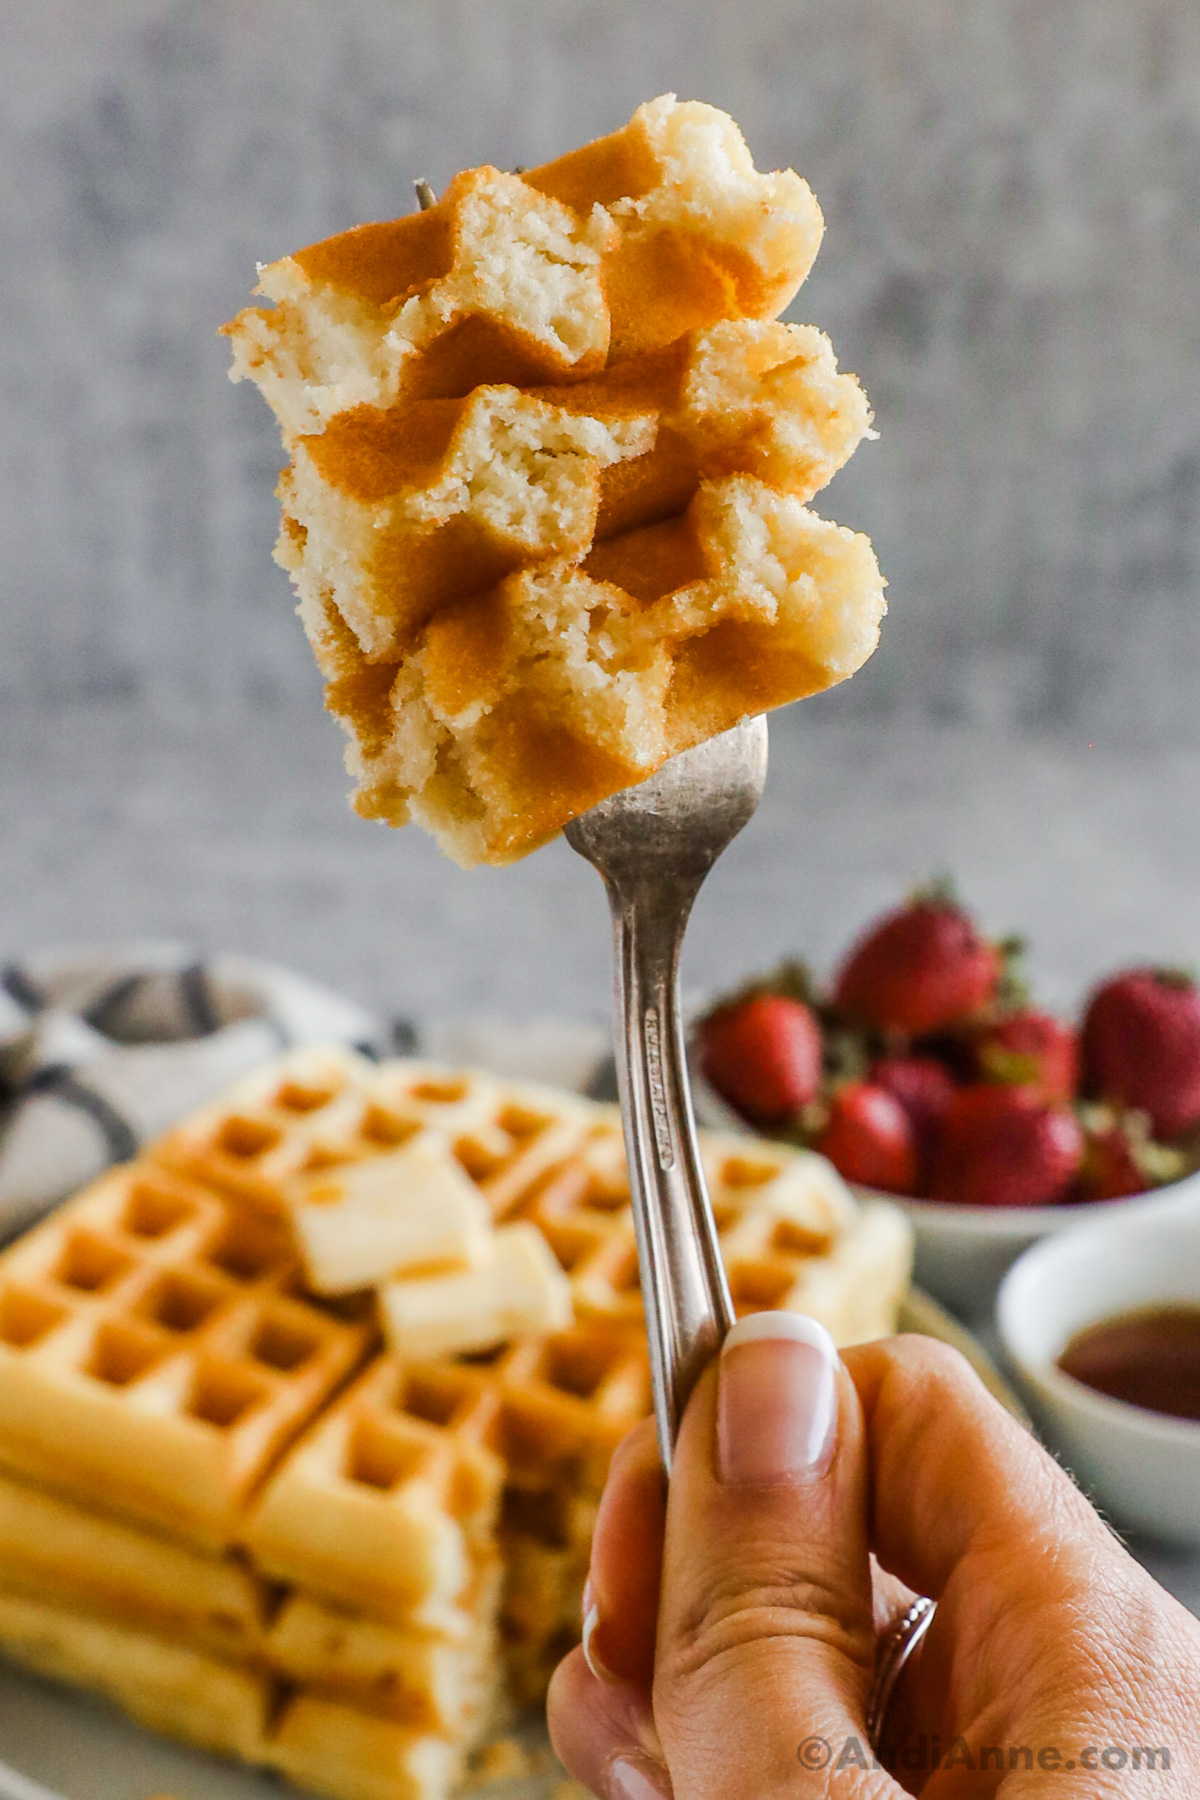 A hand holding a fork with a bite of waffles. Stack of waffles and bowl of strawberries in the background.